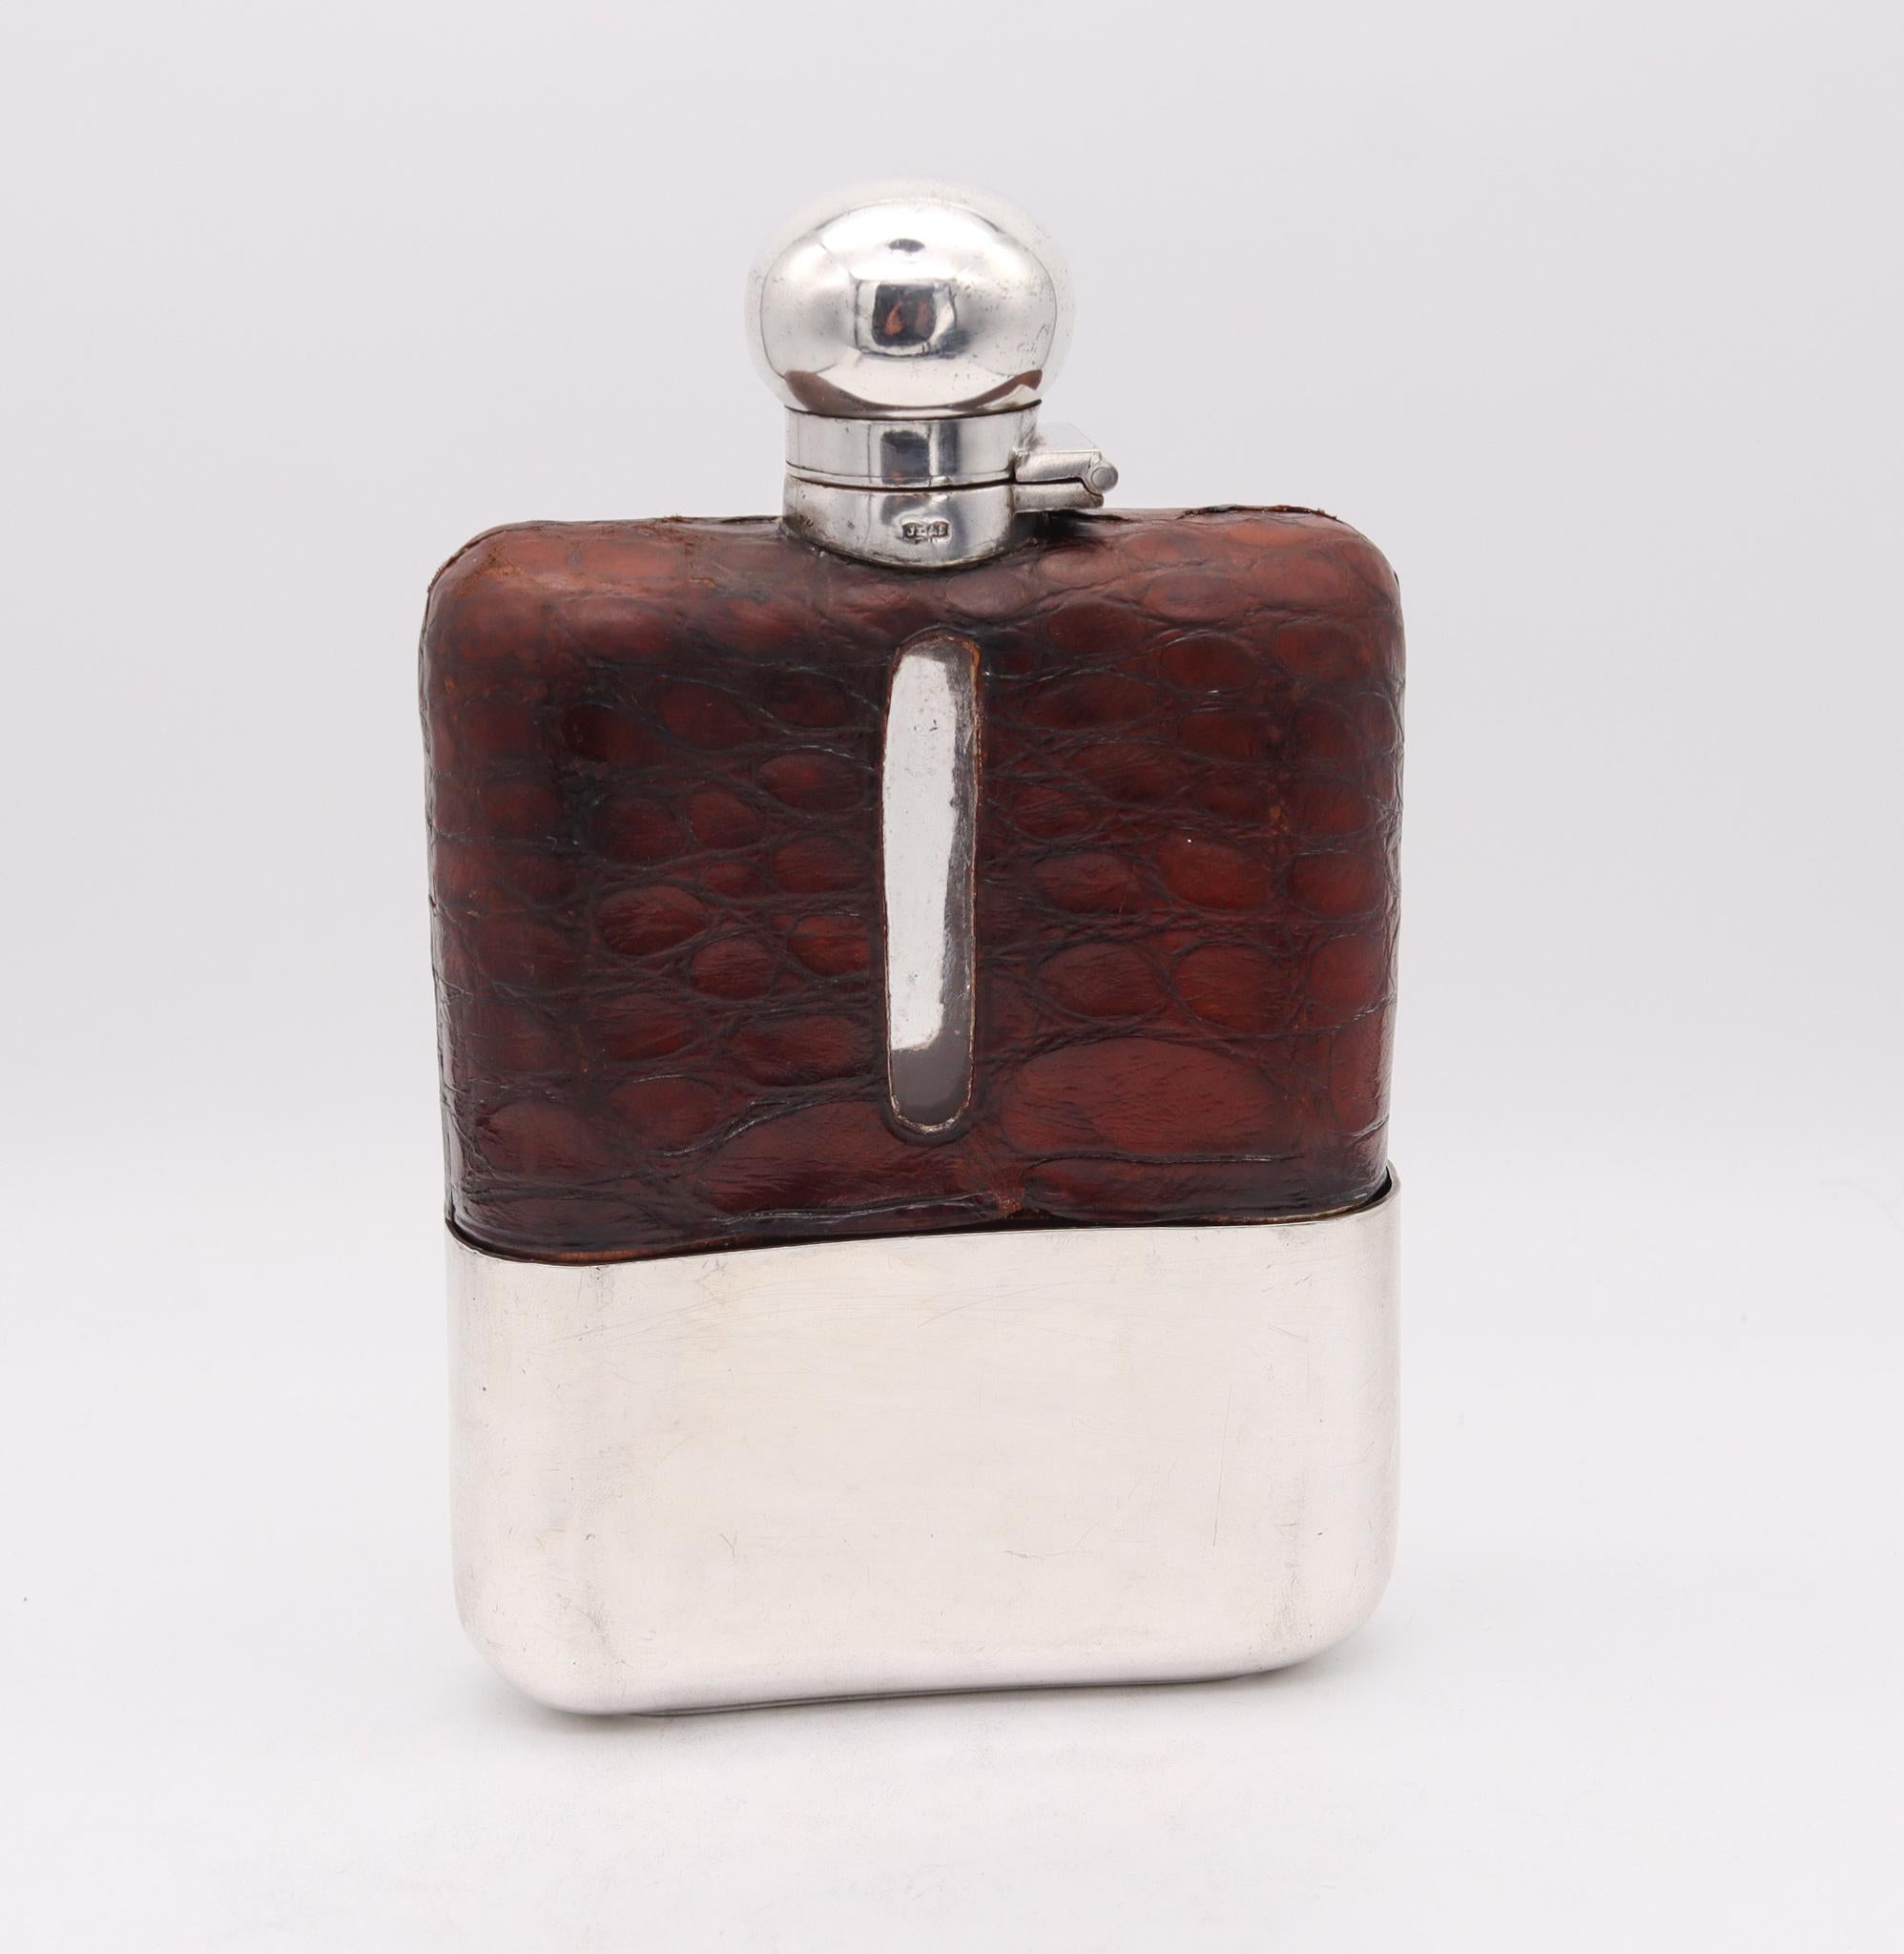 Liquor flask bottle designed by James Dixon & Sons.

Very handsome and handy liquor flask bottle, created in Sheffield England by the silversmith James Dixon & Sons, back in the 1900. This beautiful large liquor flask has been crafted in solid